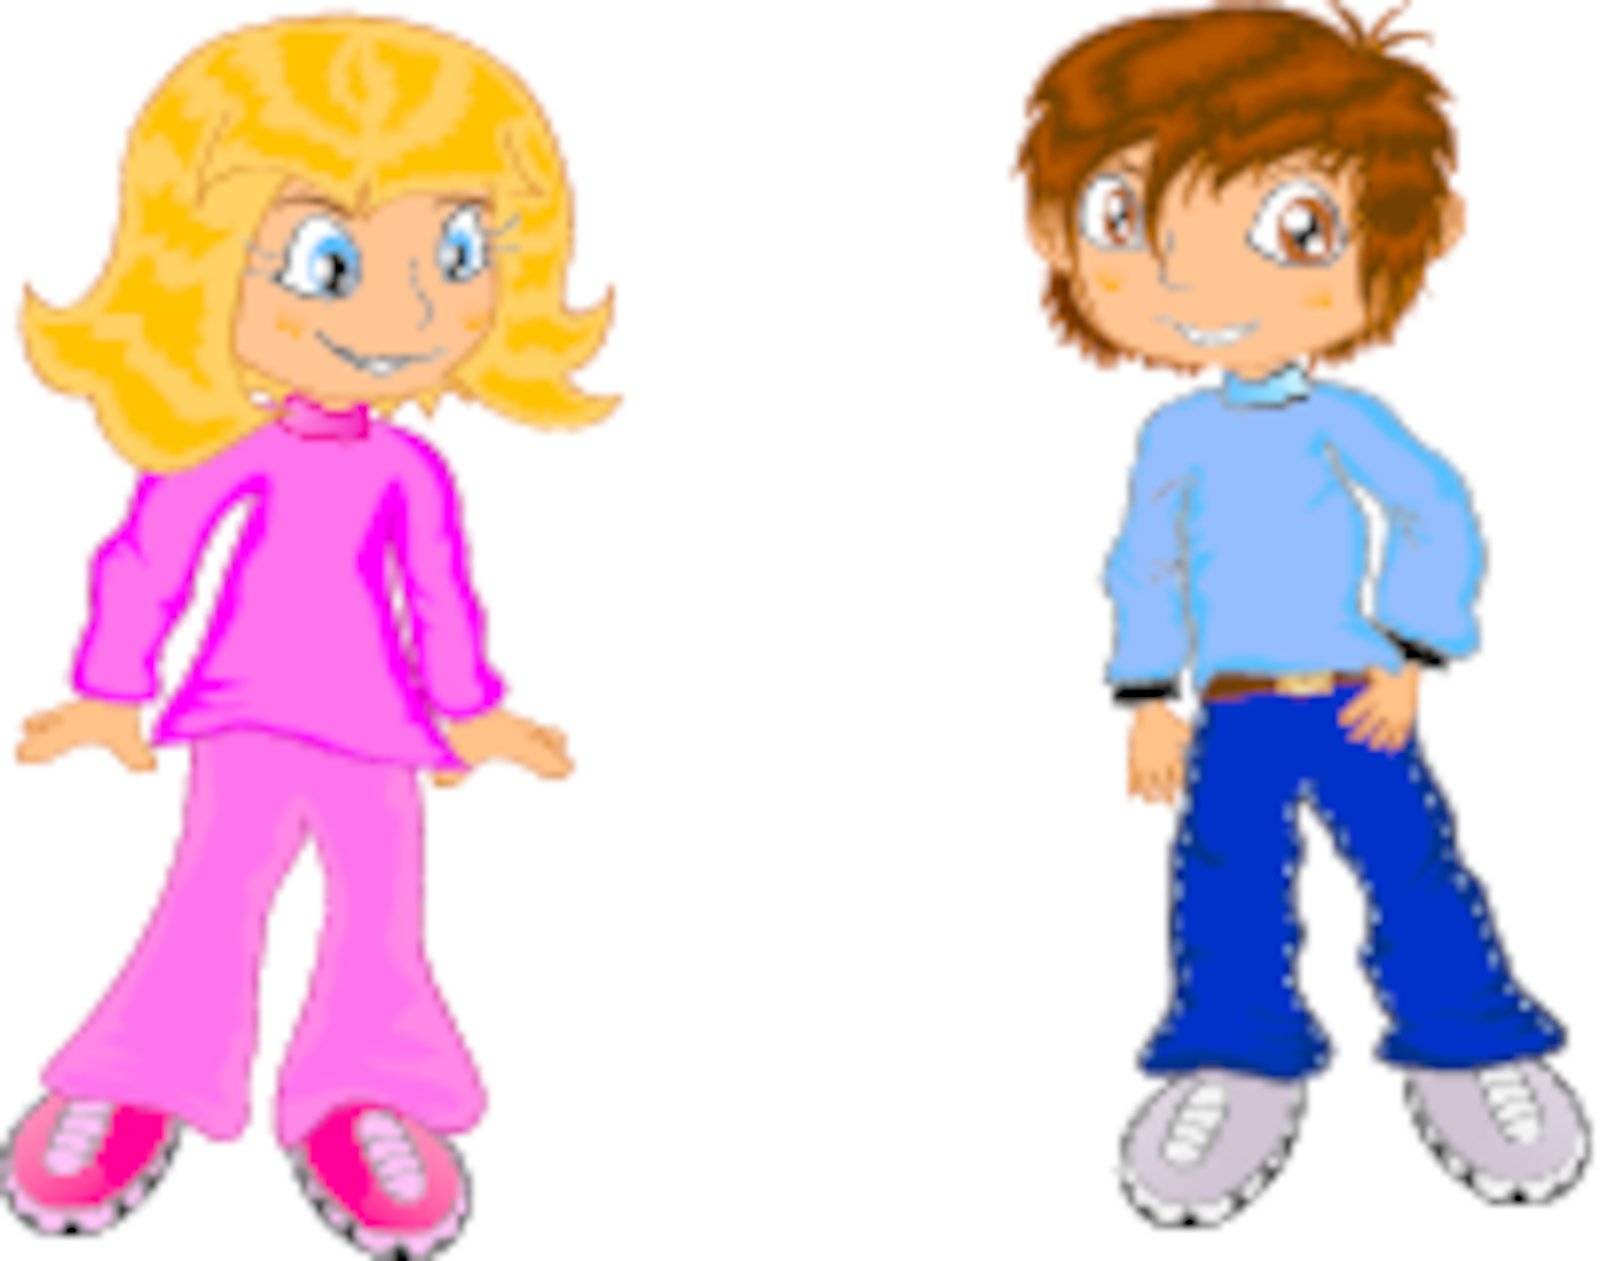 vector illustration shows children, a boy and a girl